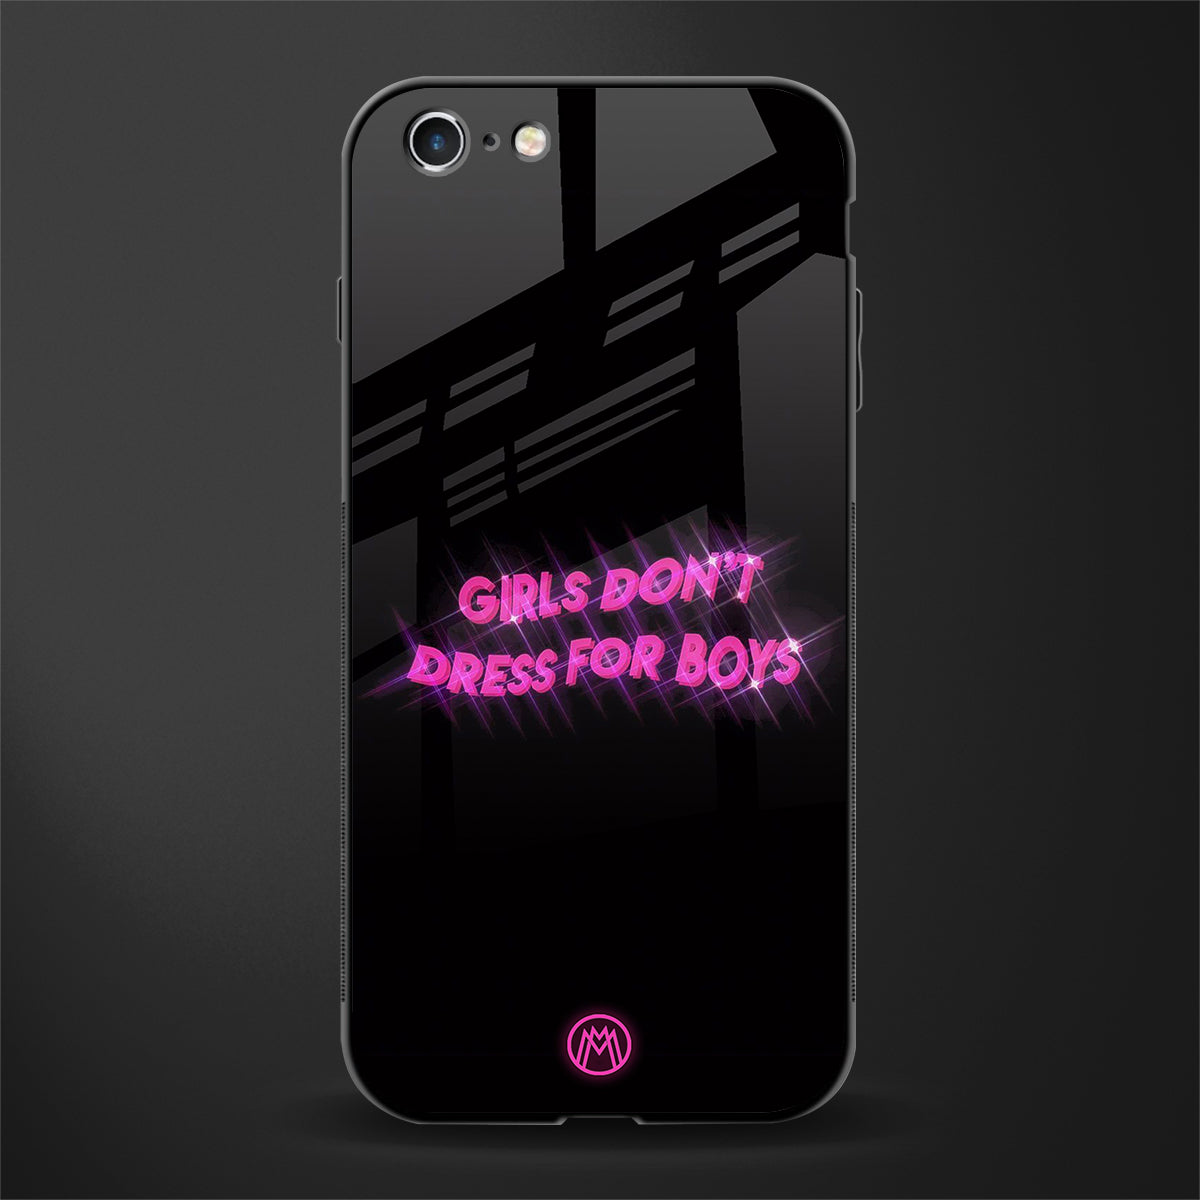 girls don't dress for boys glass case for iphone 6 image